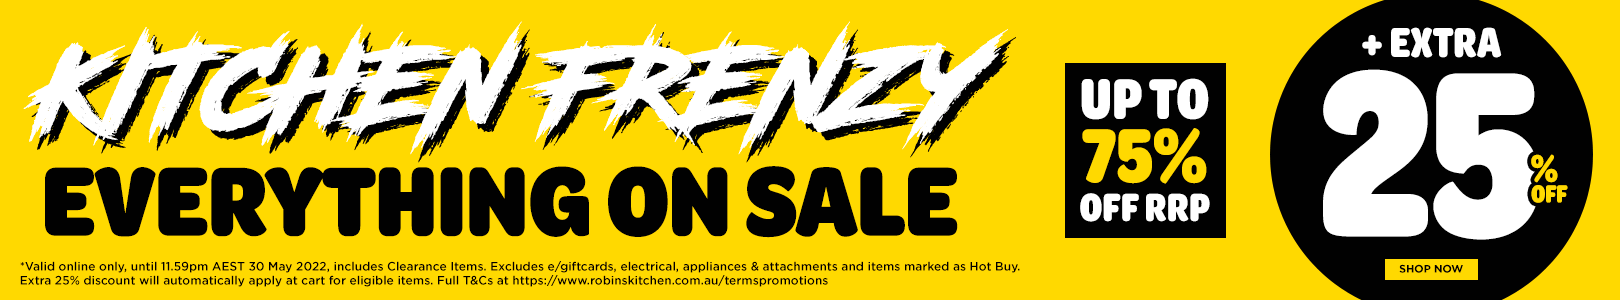 Robins Kitchen Frenzy sale Up to 75% OFF RRP + 25% OFF Sitewide